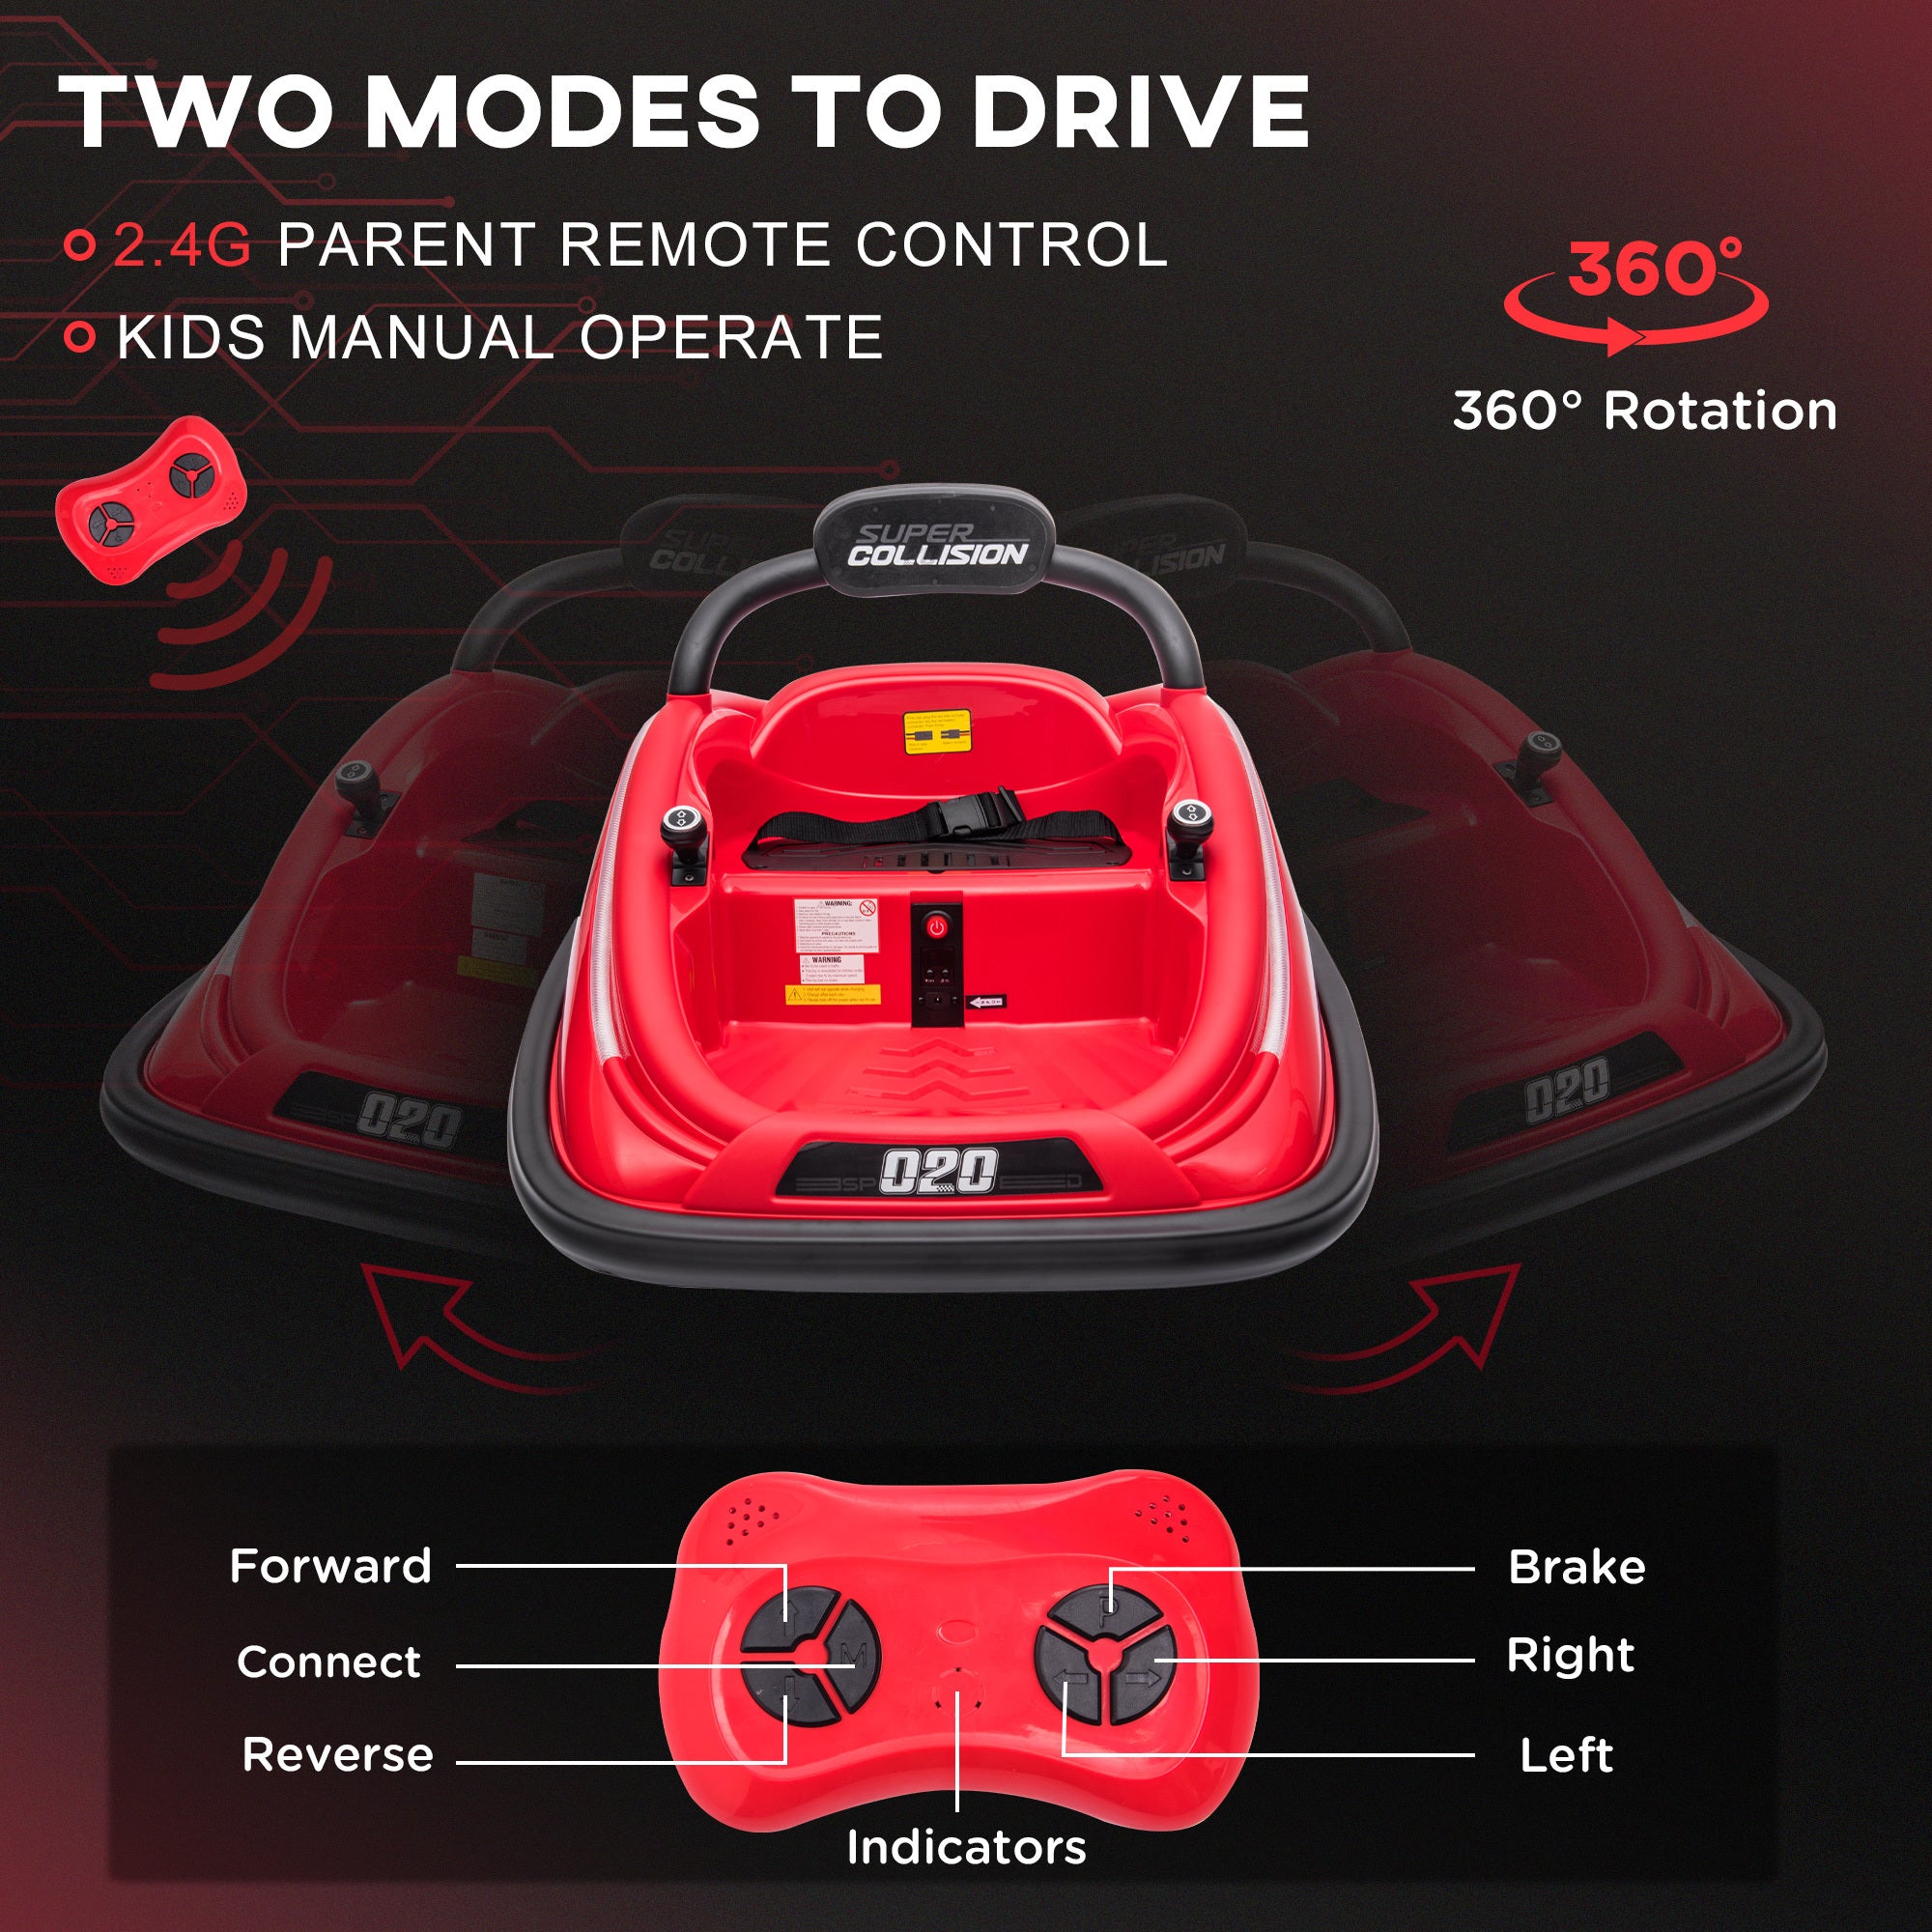 Aosom 12V Toddler Bumper Car with Remote Control, 360 red-steel